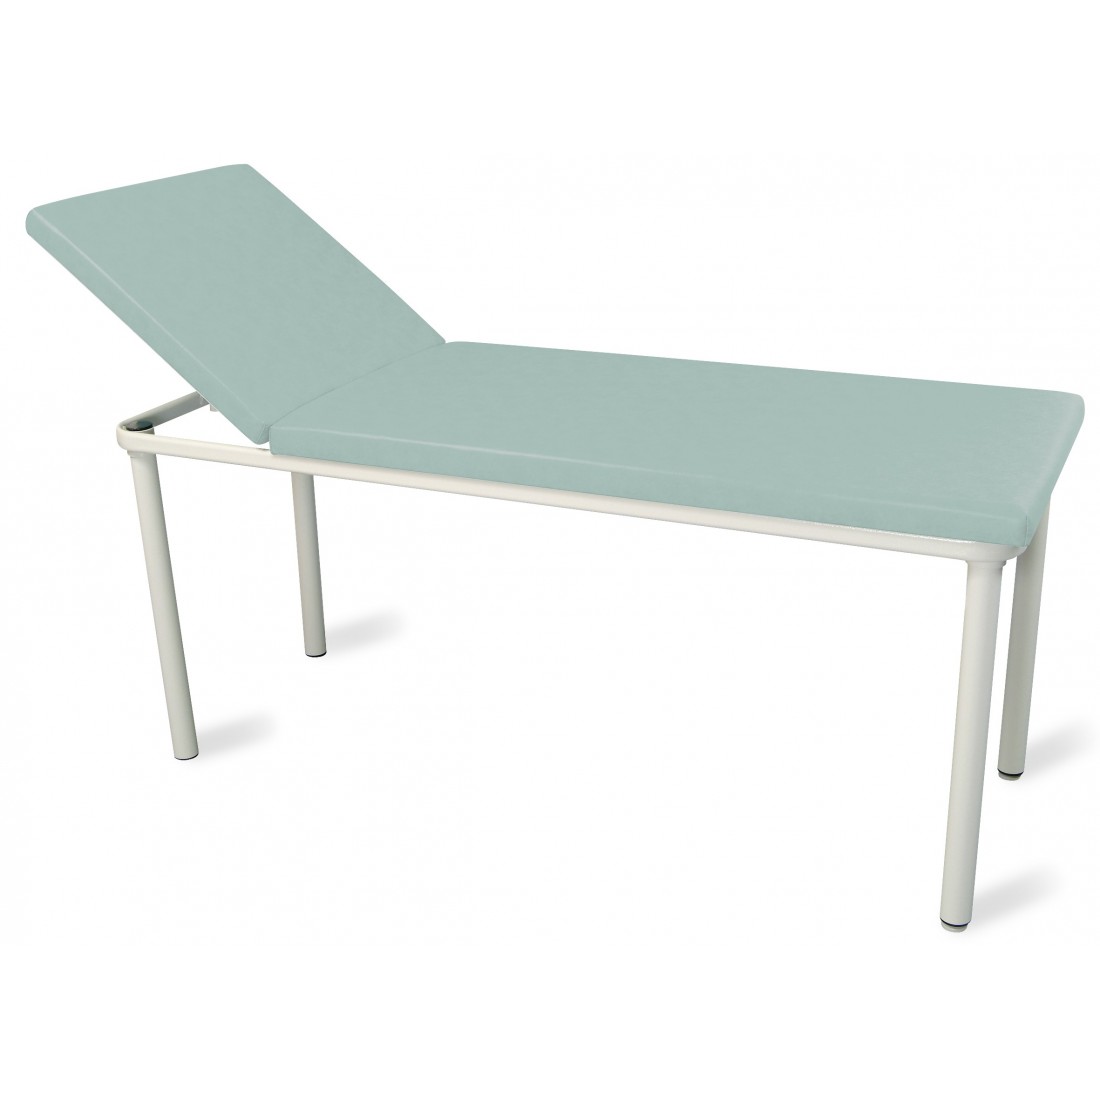 1810 - Self Assembly Exam Table